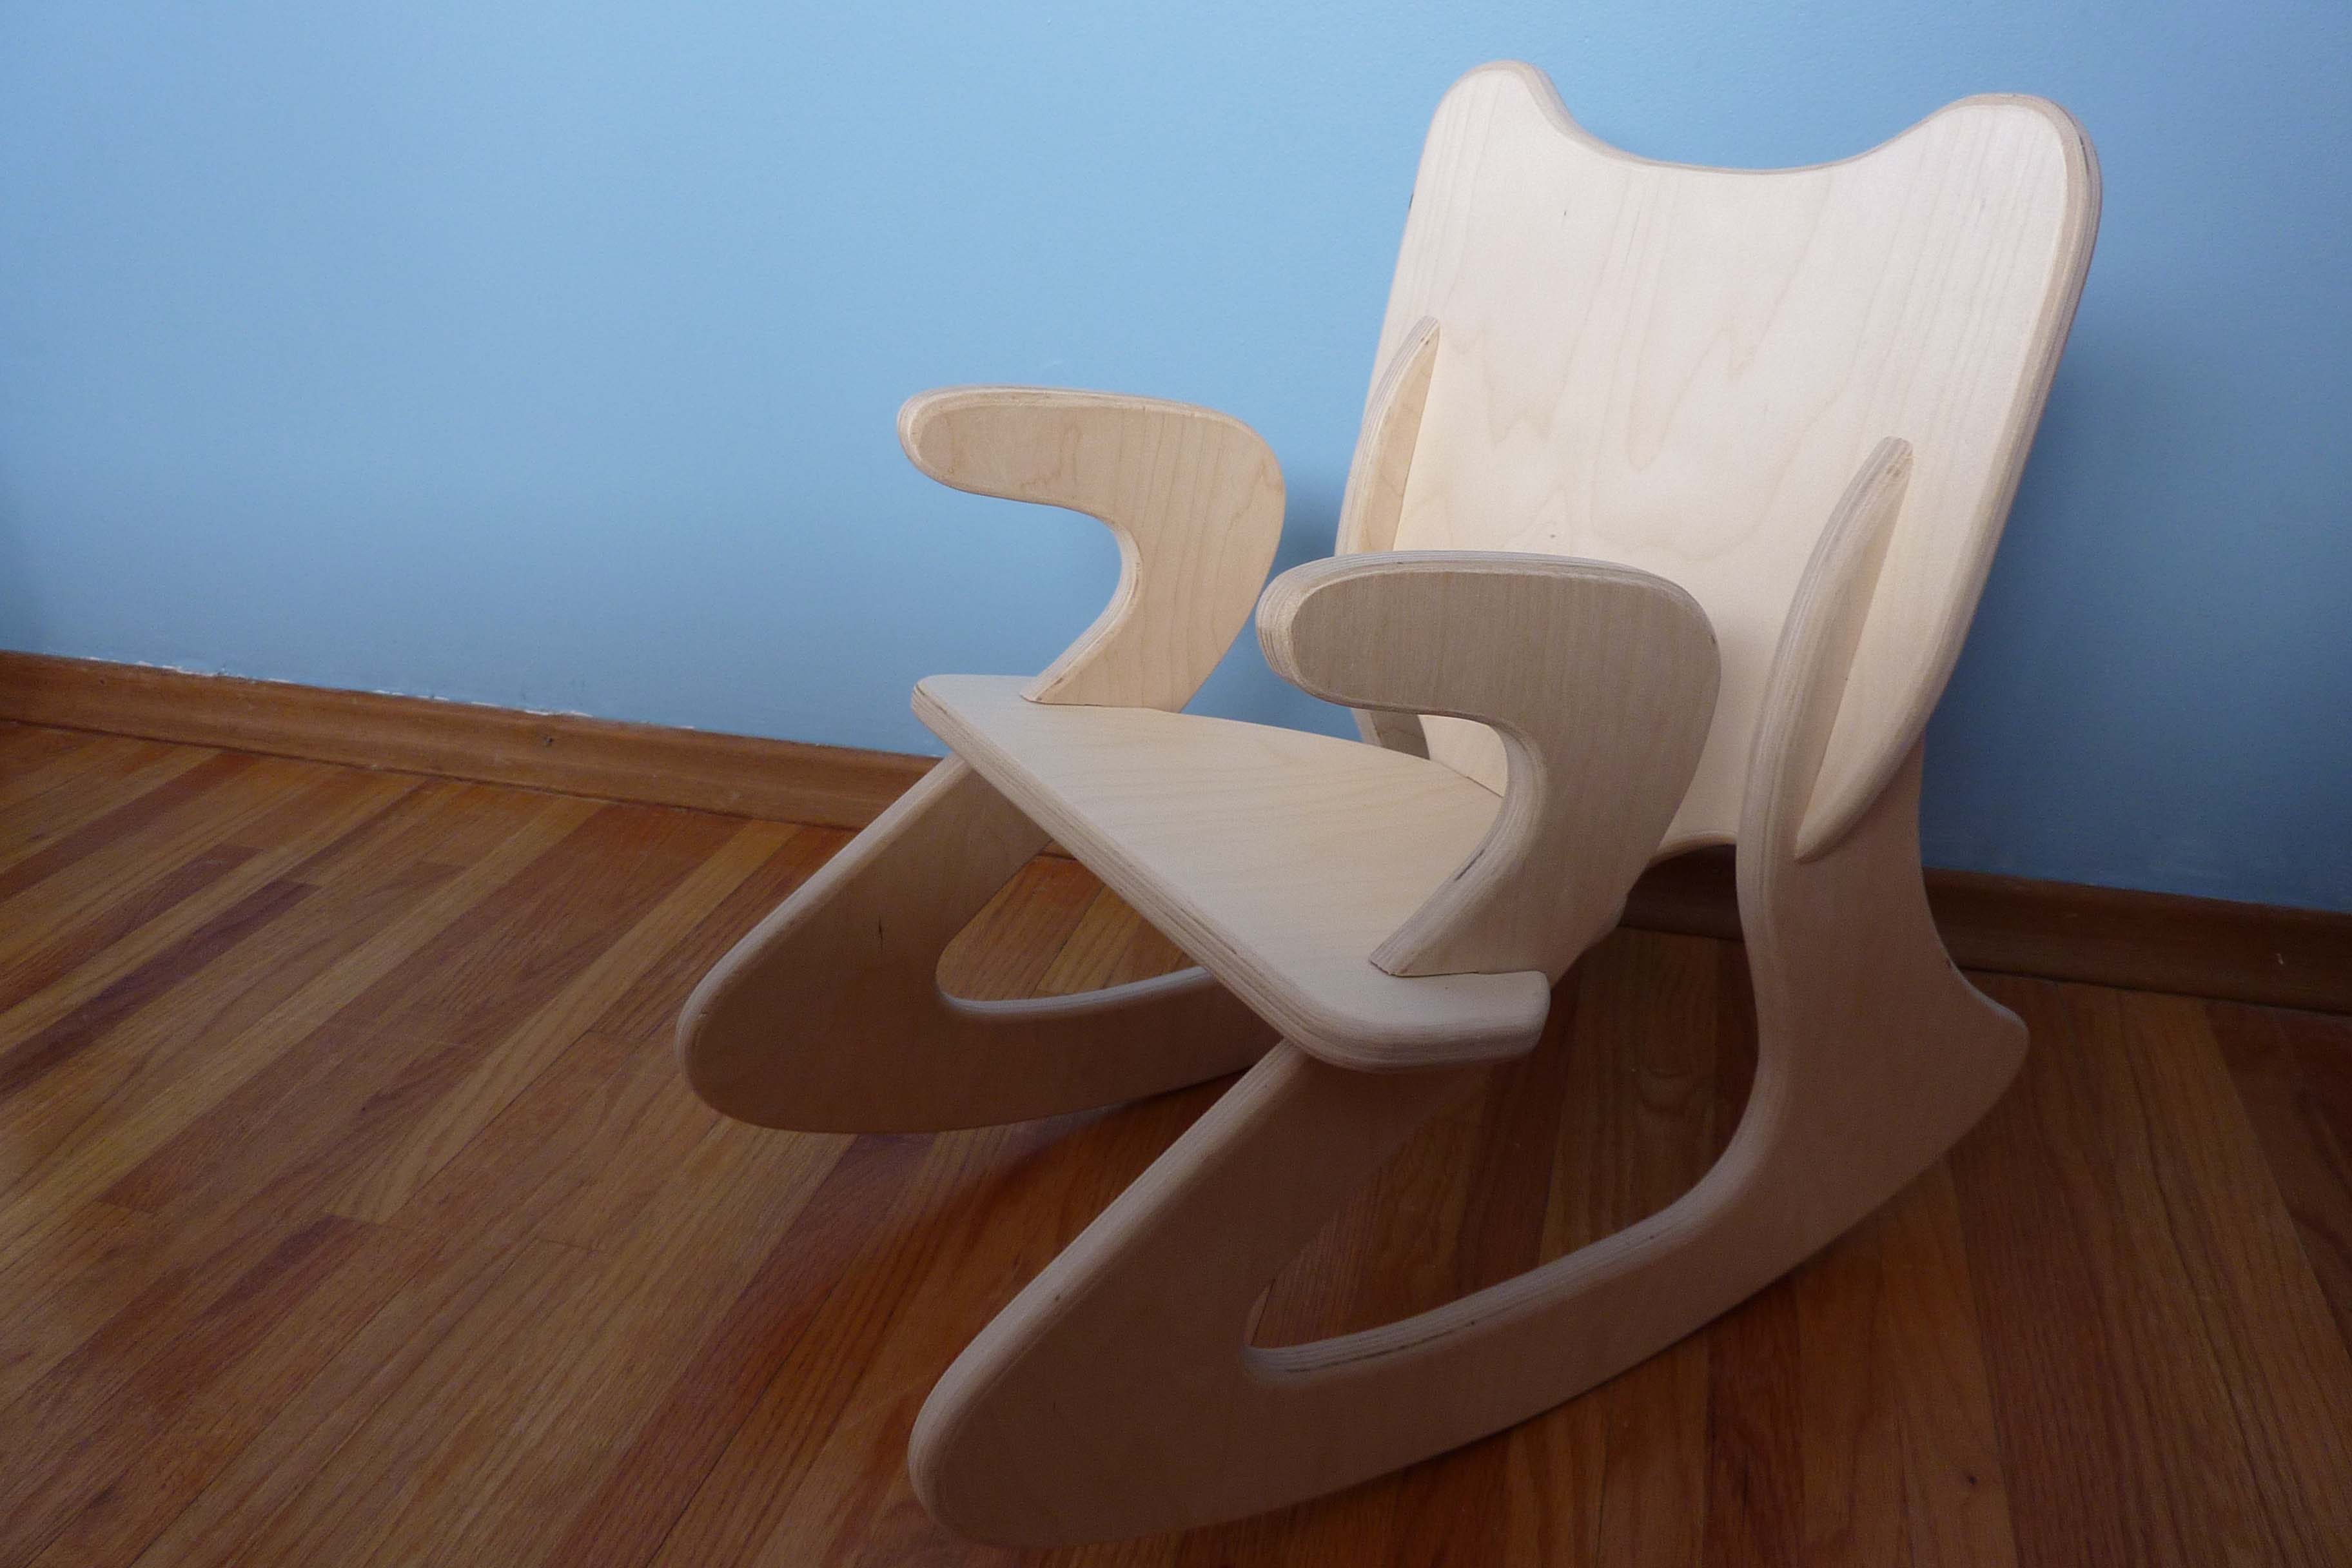 Plywood Rocking Chair Plans PDF Woodworking